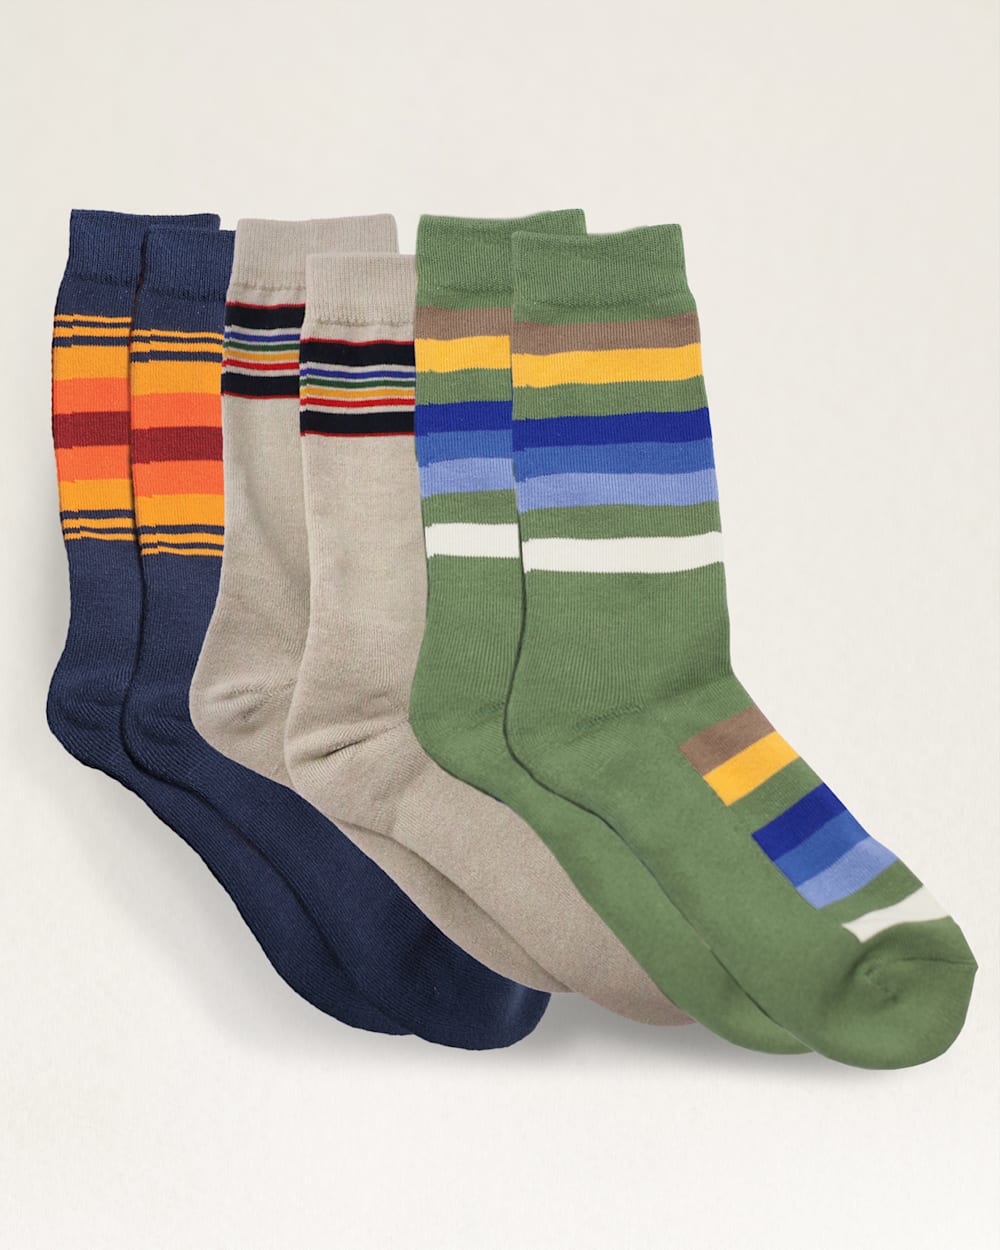 ALTERNATE VIEW OF 3-PACK NATIONAL PARK SOCKS GIFT BOX IN YELLOWSTONE TAUPE/ROCKY MTN/GRAND CANYON image number 3